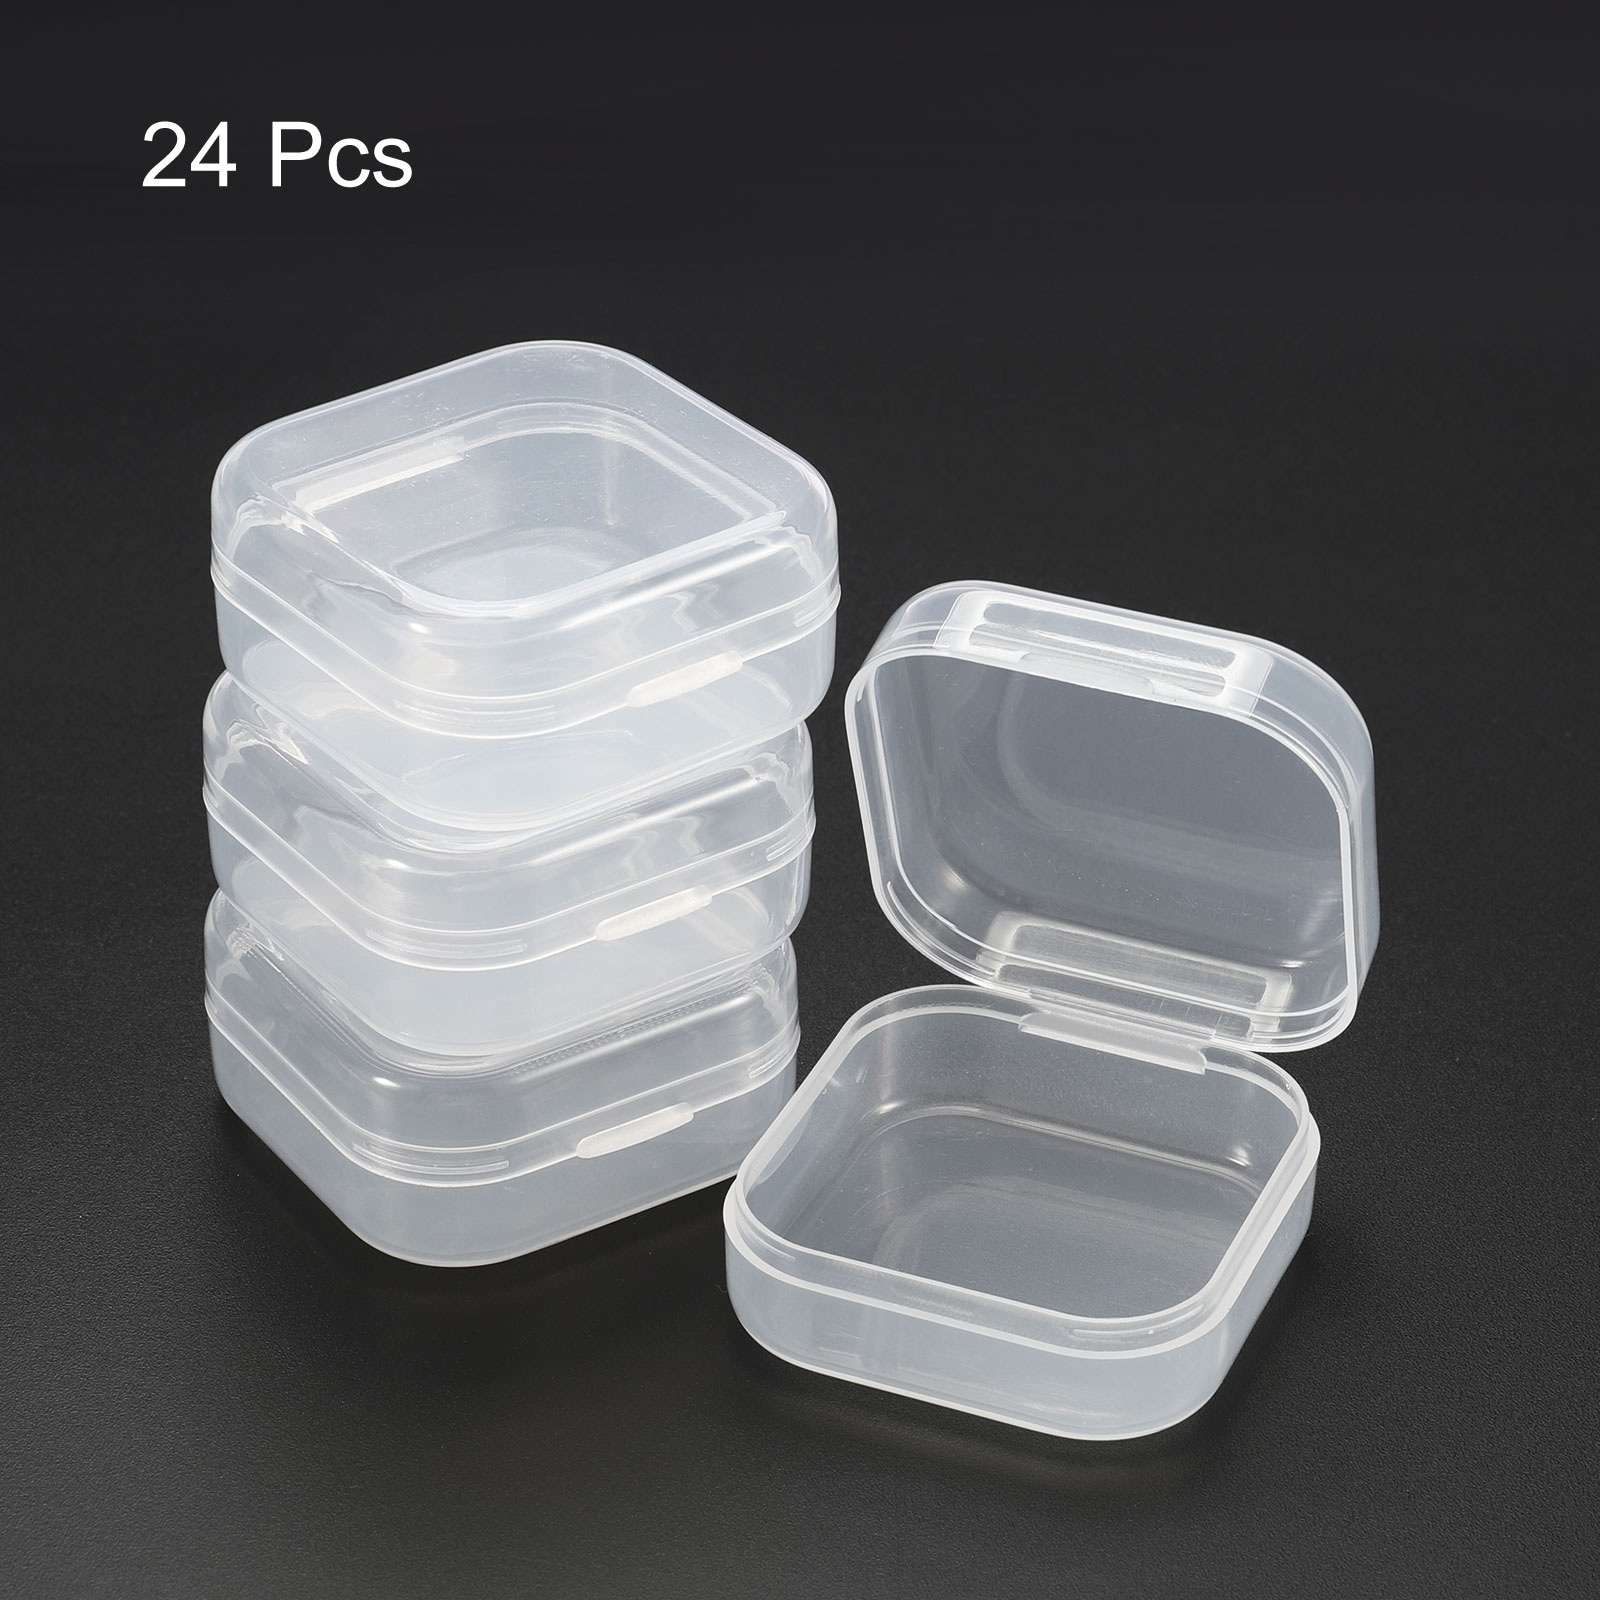 https://ak1.ostkcdn.com/images/products/is/images/direct/b2f22c5ec48fdcfbe1e24629cef93b3e7db82c06/24pcs-Clear-Storage-Container-with-Hinged-Lid-38x18mm-Plastic-Square-Craft-Box.jpg